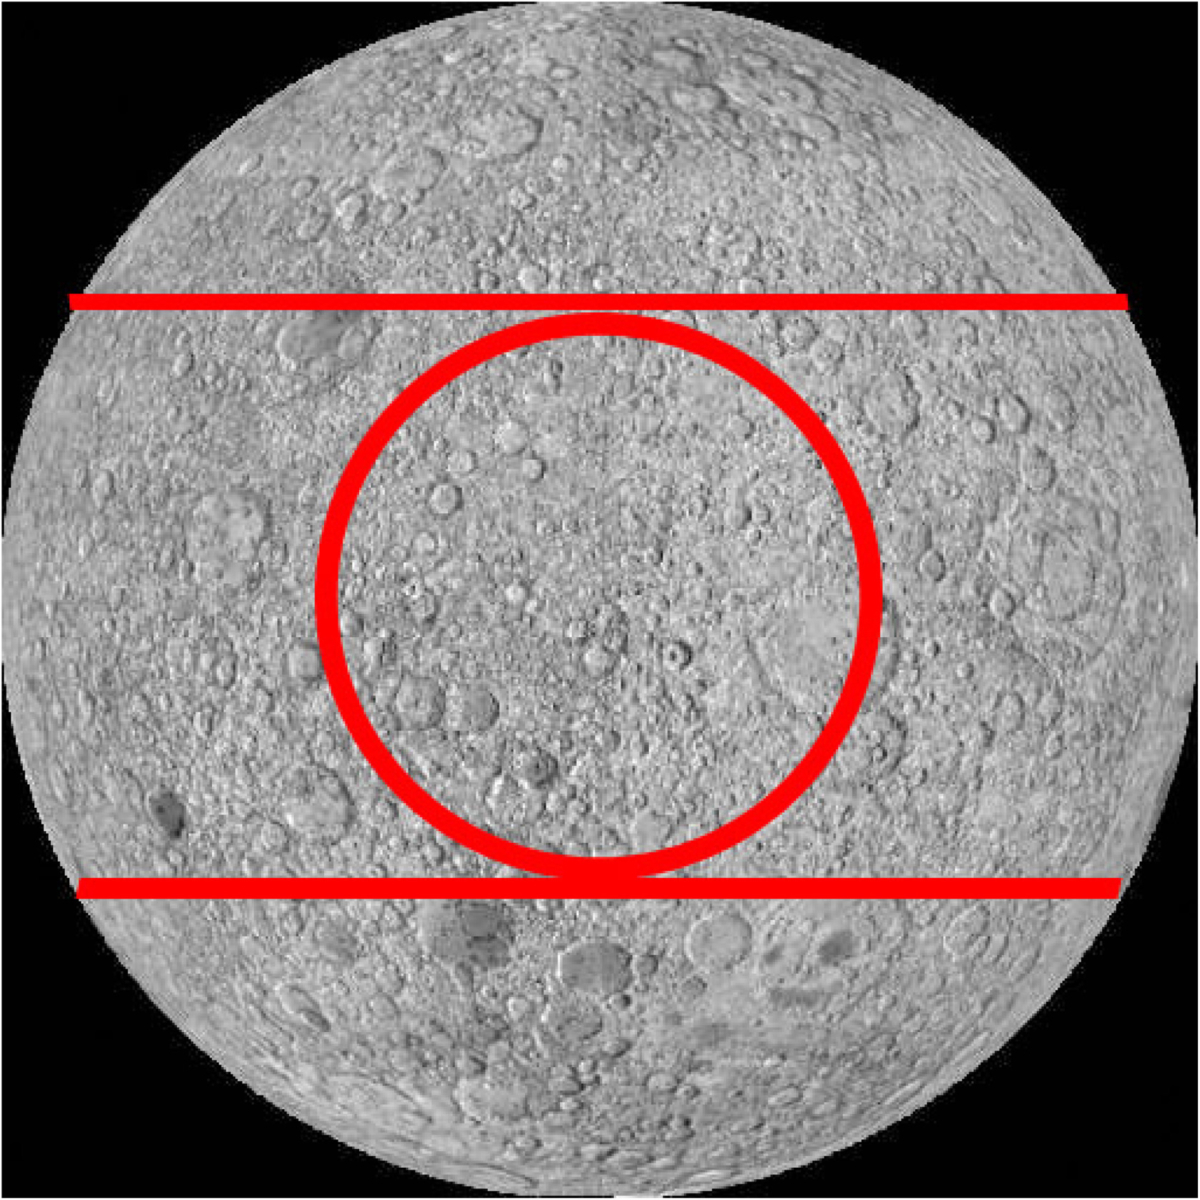 The Protected Antipode Circle, a circular piece of lunar landscape proposed to be reserved for scientific purposes on the far side of the moon.